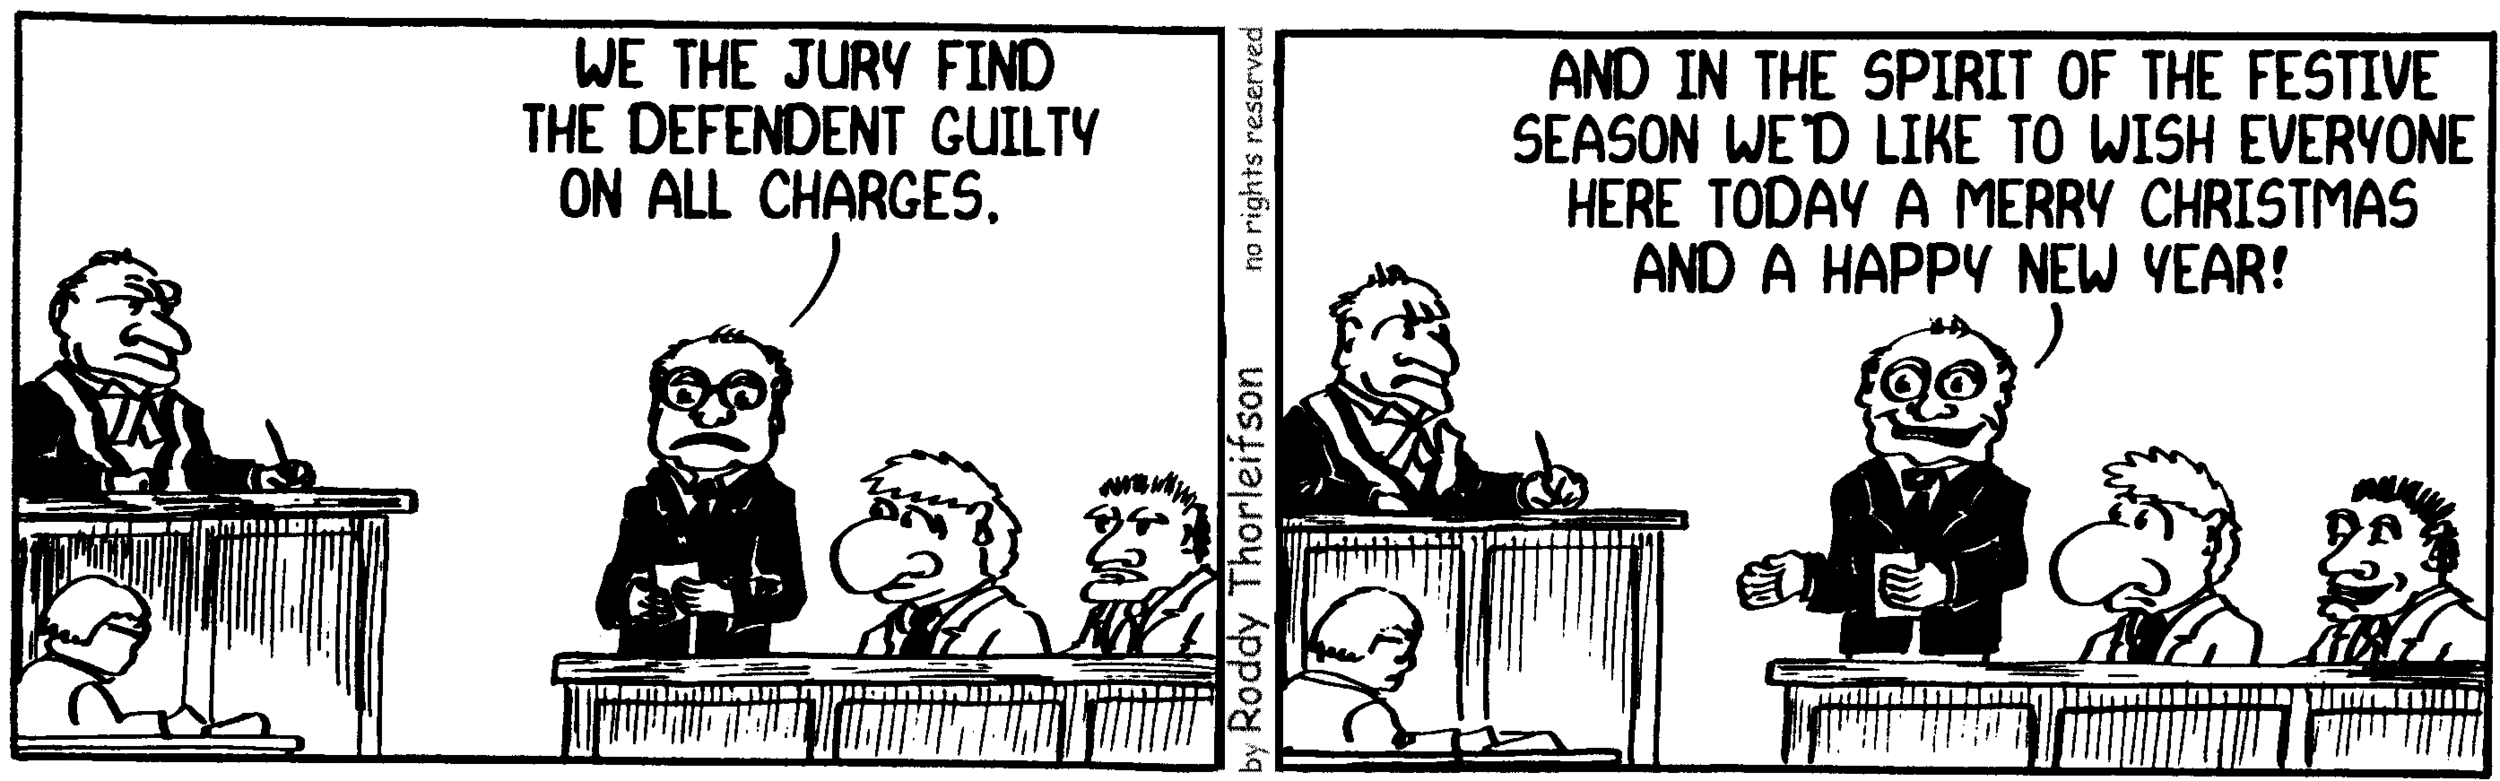 free cartoon Christmas spirit being guilty on all charges